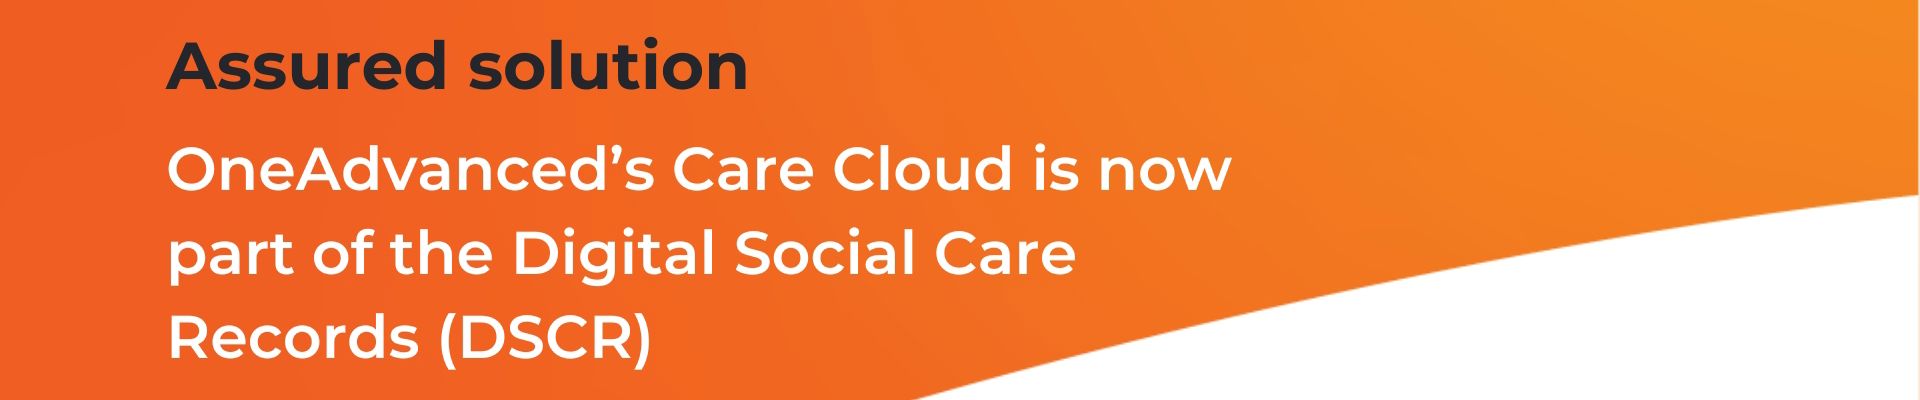 OneAdvanced’s Care Cloud is an assured Digital Social Care Records solution